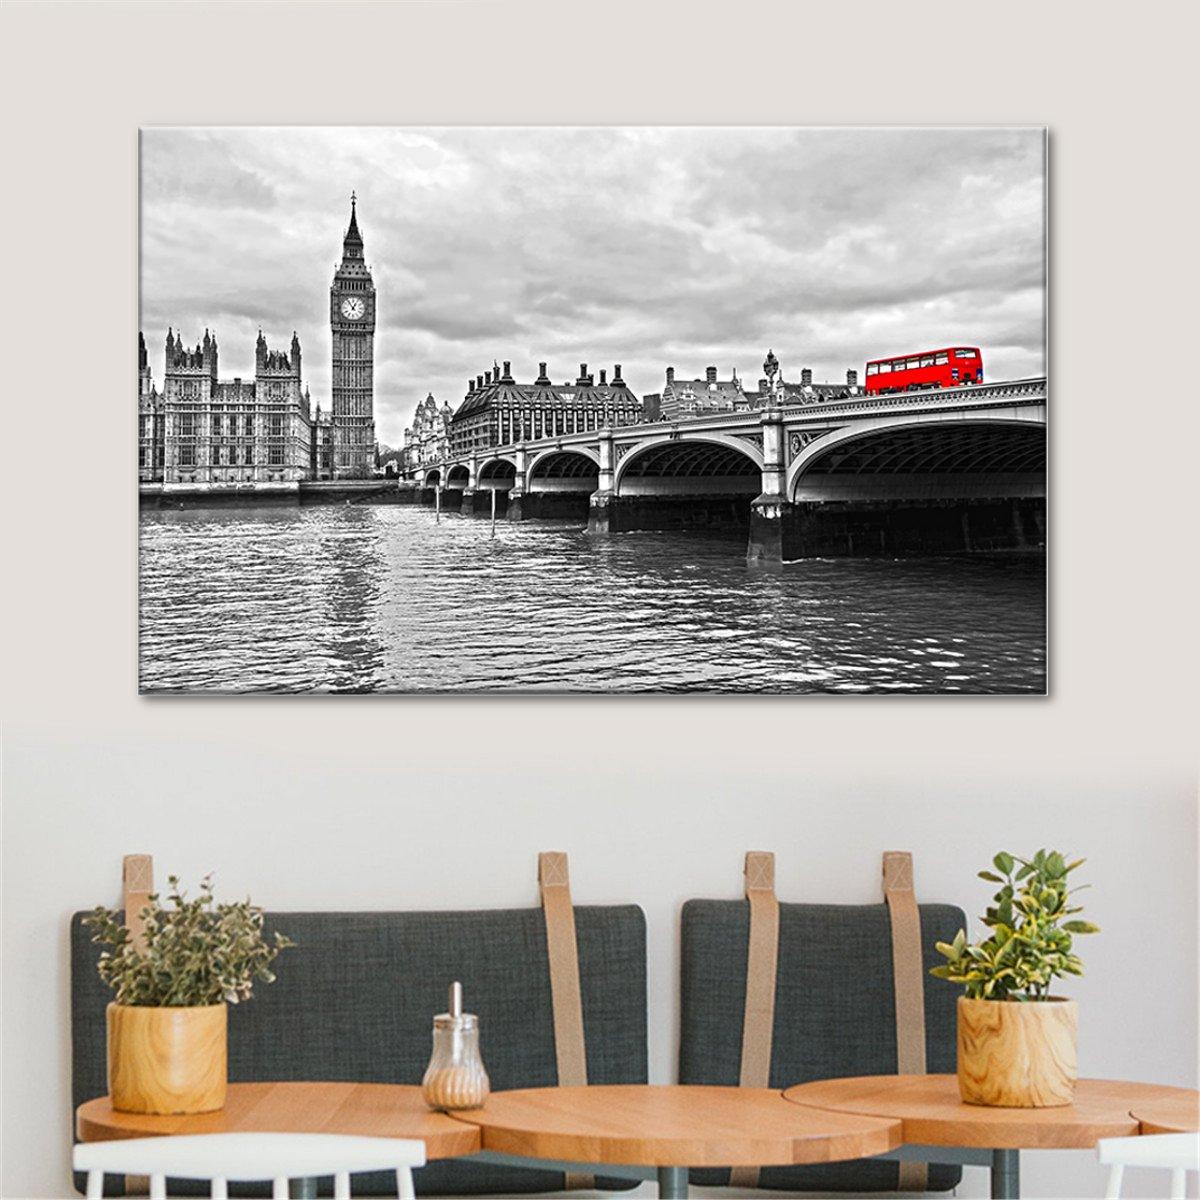 

City Modern Canvas London Scenery Print Paintings Wall Art Picture Decor Unframed